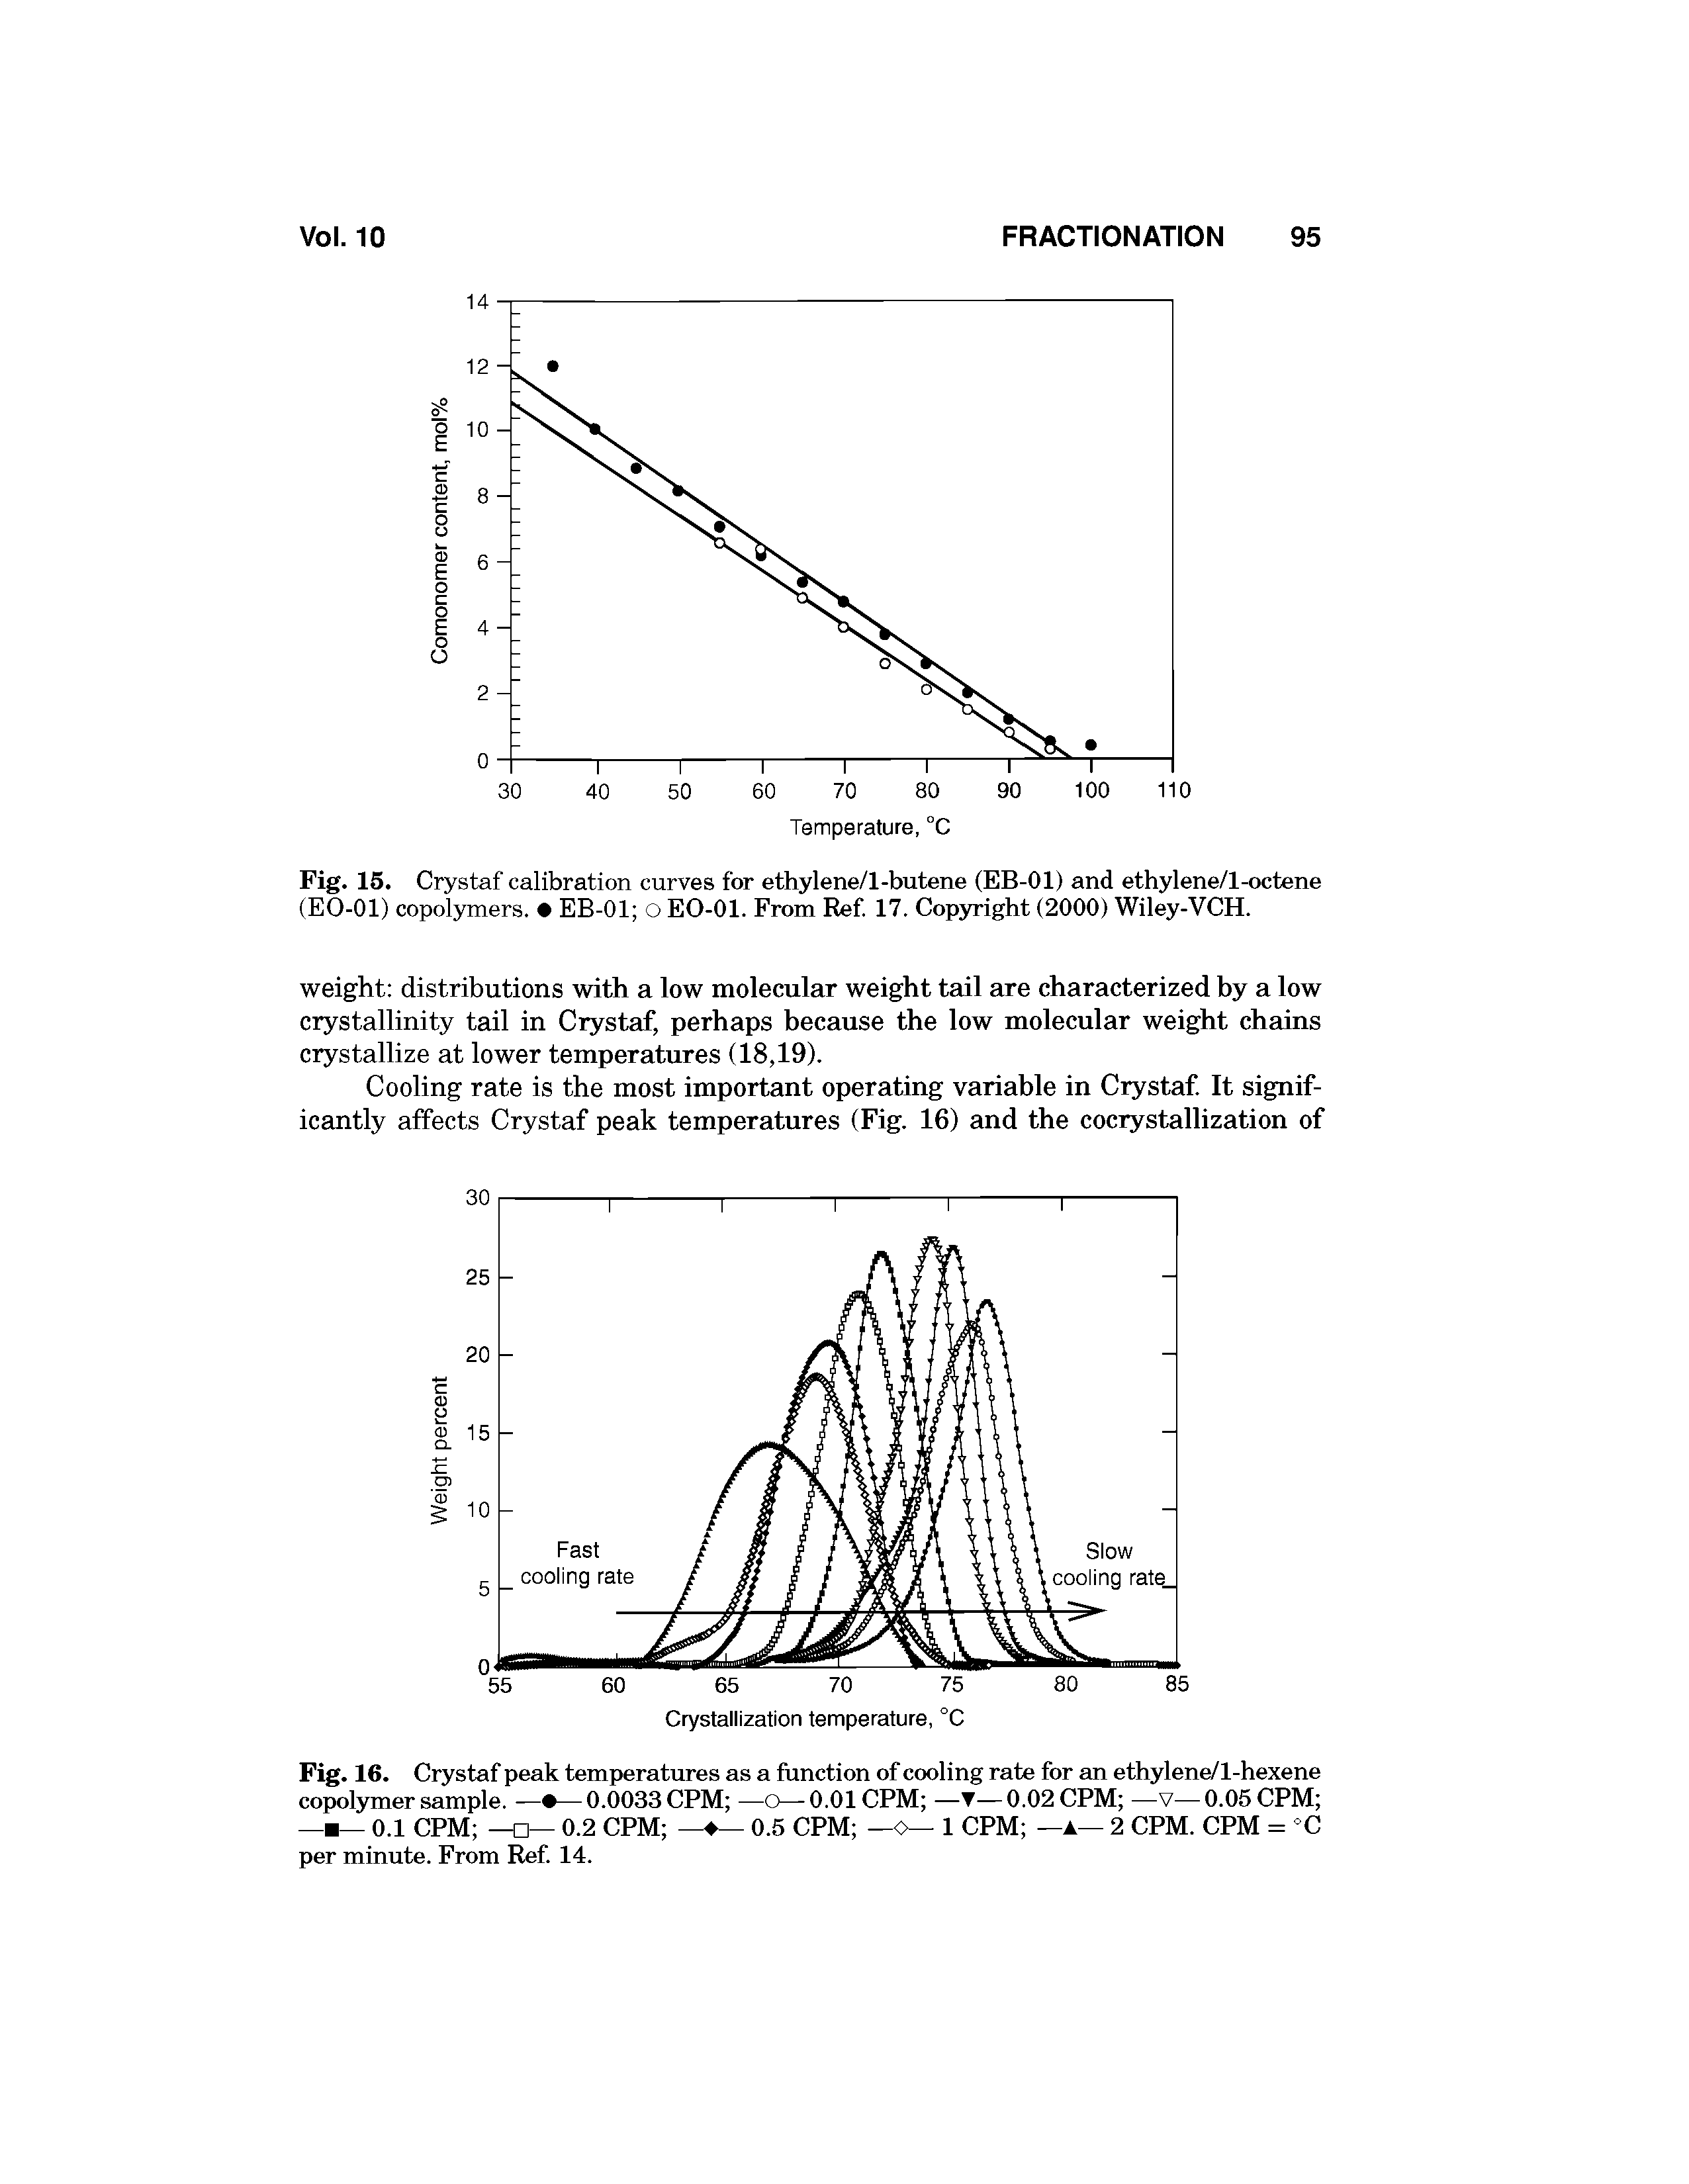 Fig. 15. Crystaf calibration curves for ethylene/l-butene (EB-01) and ethylene/l-octene (EO-01) copolymers. EB-01 o EO-01. From Ref 17. Copyright (2000) Wiley-VCH.